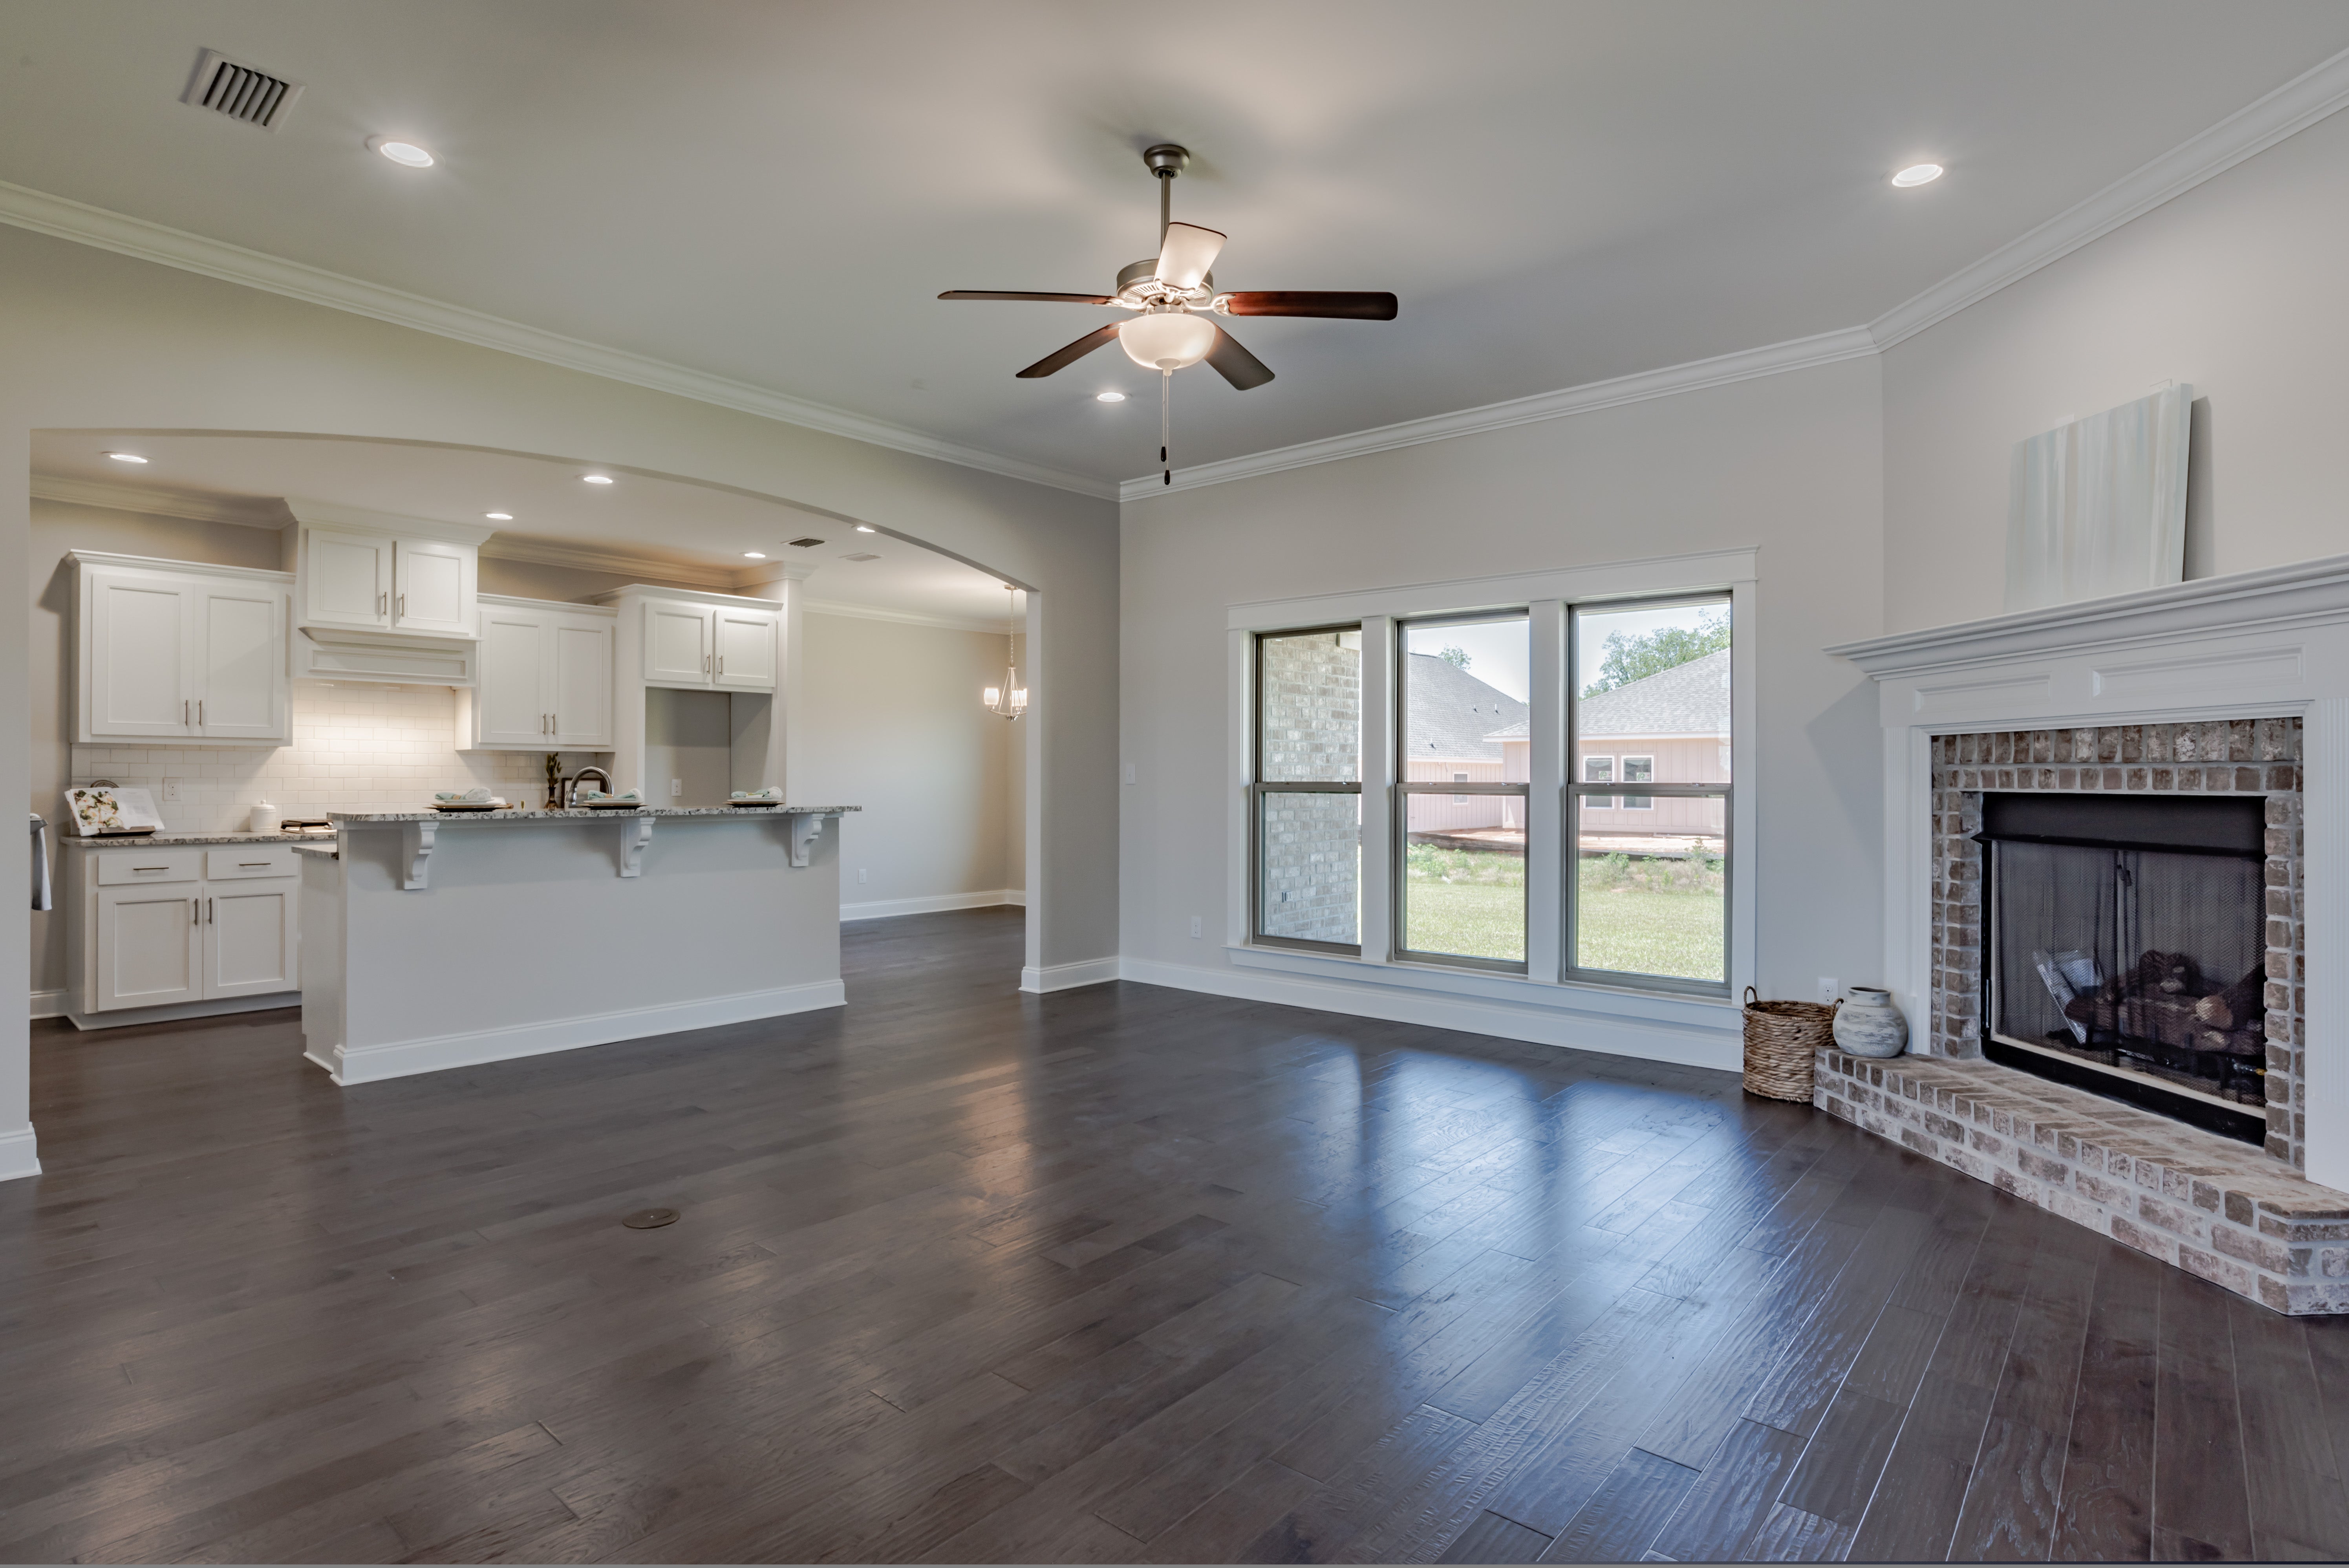 4br New Home in Cantonment, FL